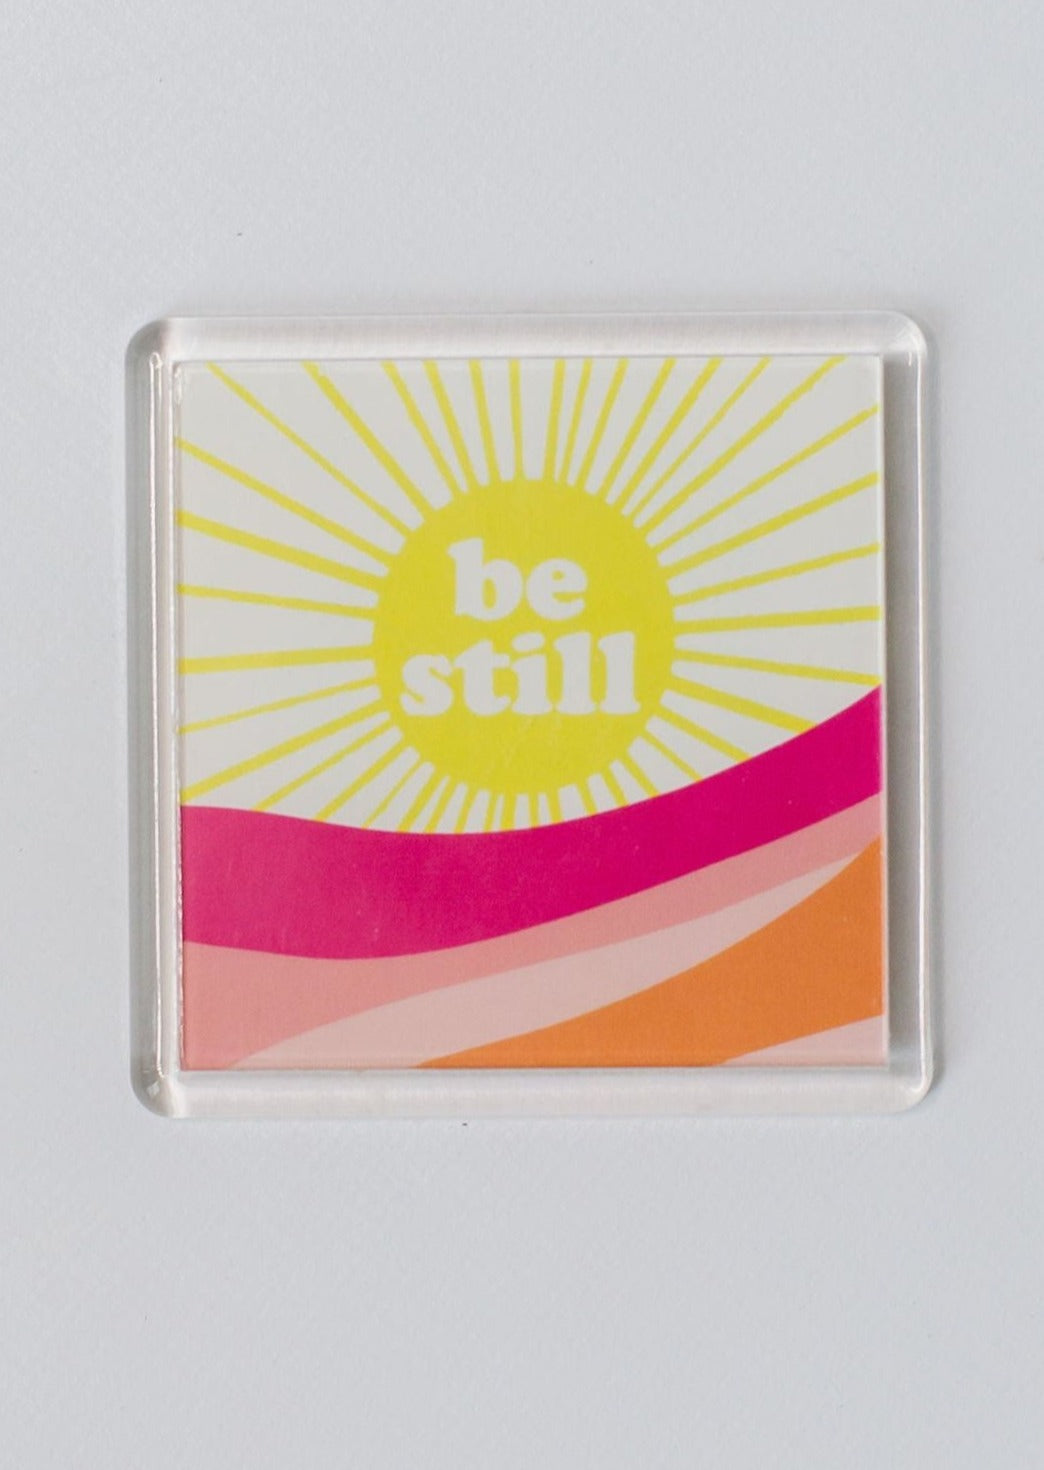 Inspirational Magnets Home & Lifestyle Mary Square Be Still